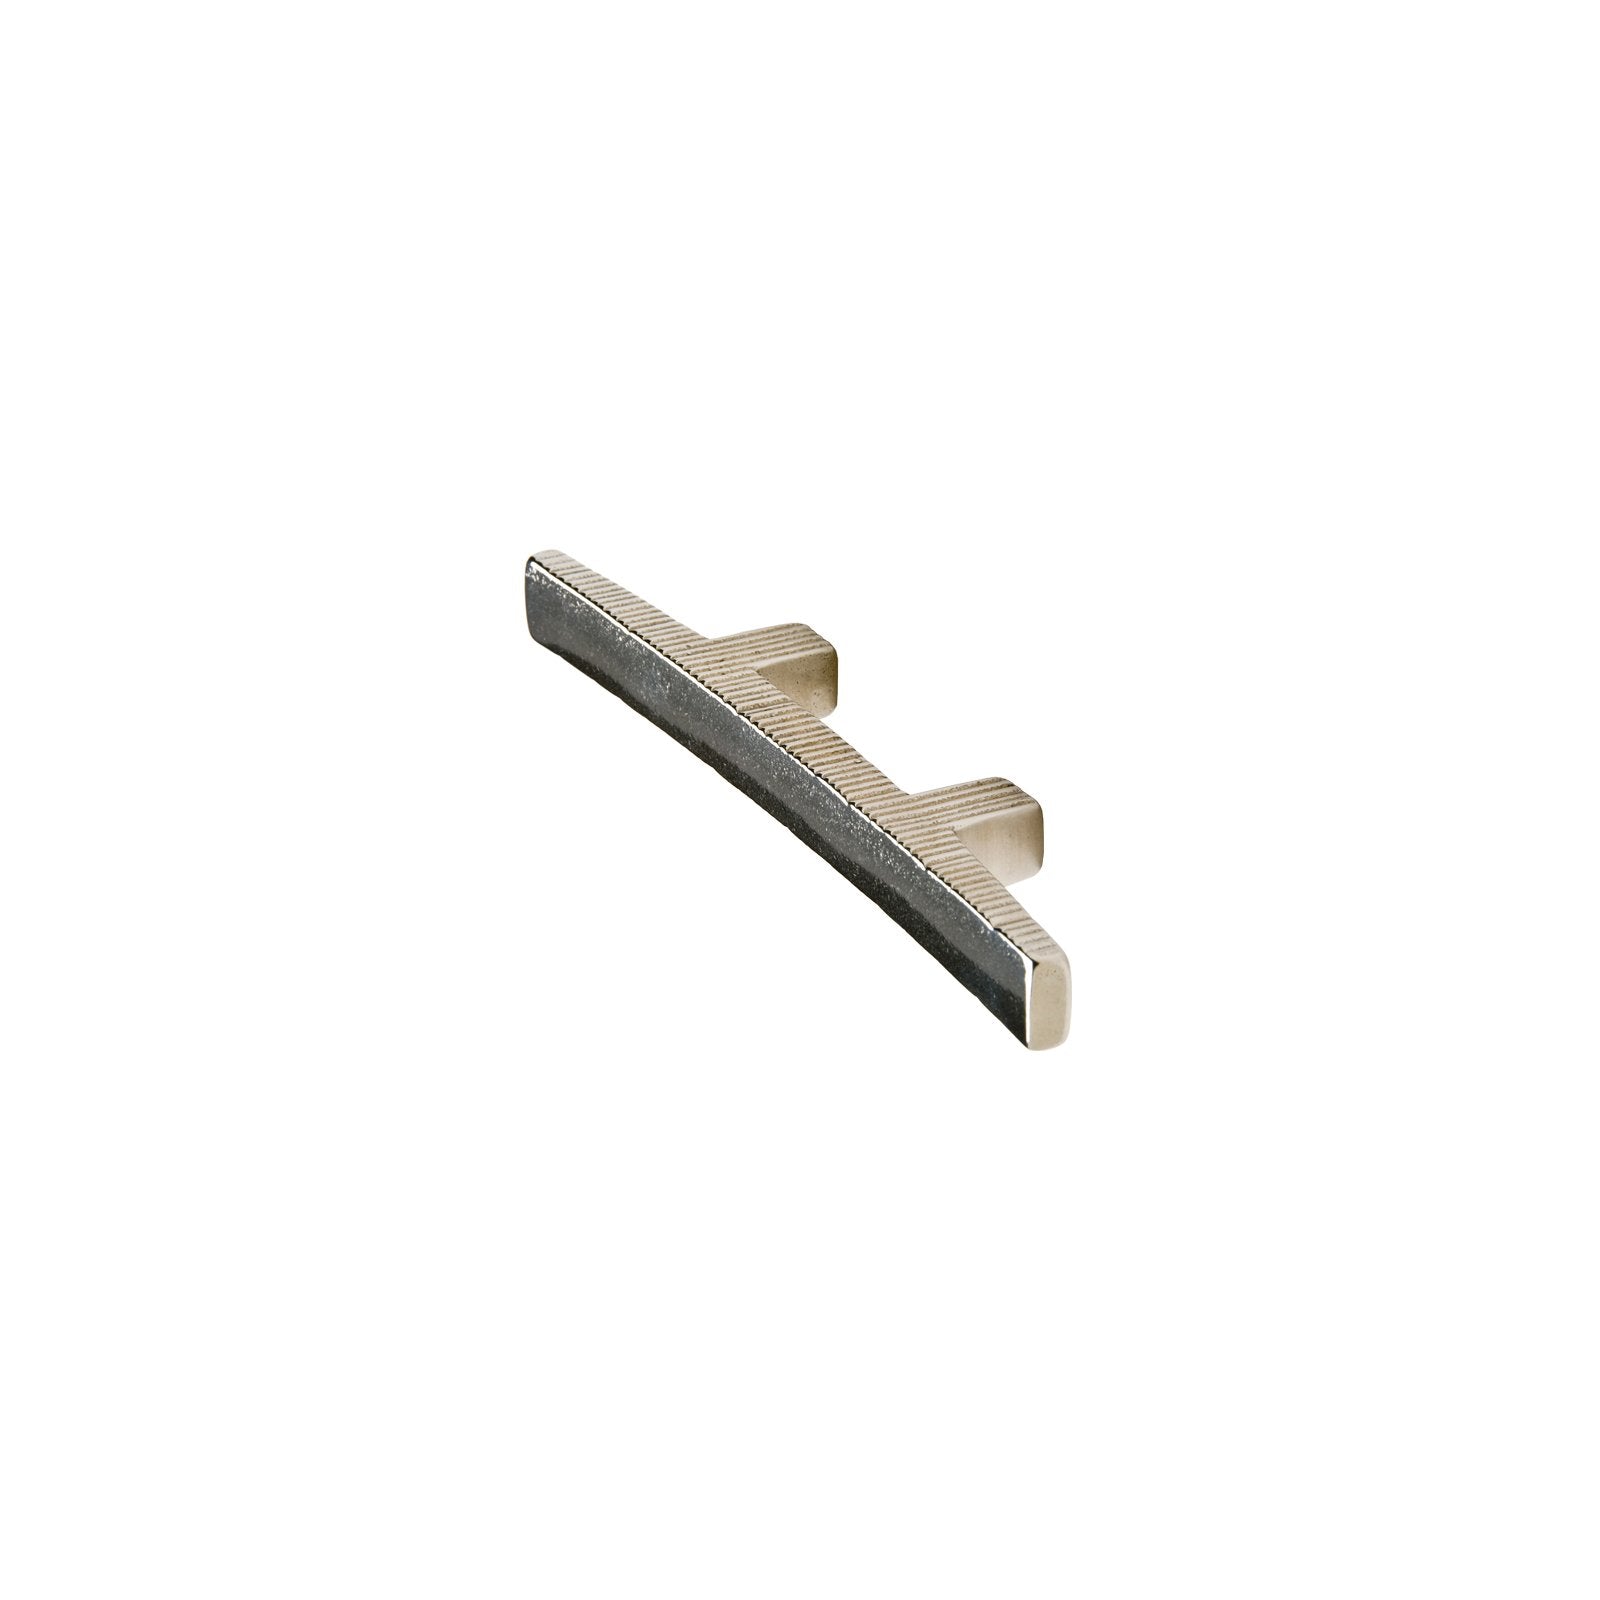 Rocky Mountain Hardware CK20045 - 3 1/6" C-to-C Brut Cabinet Pull